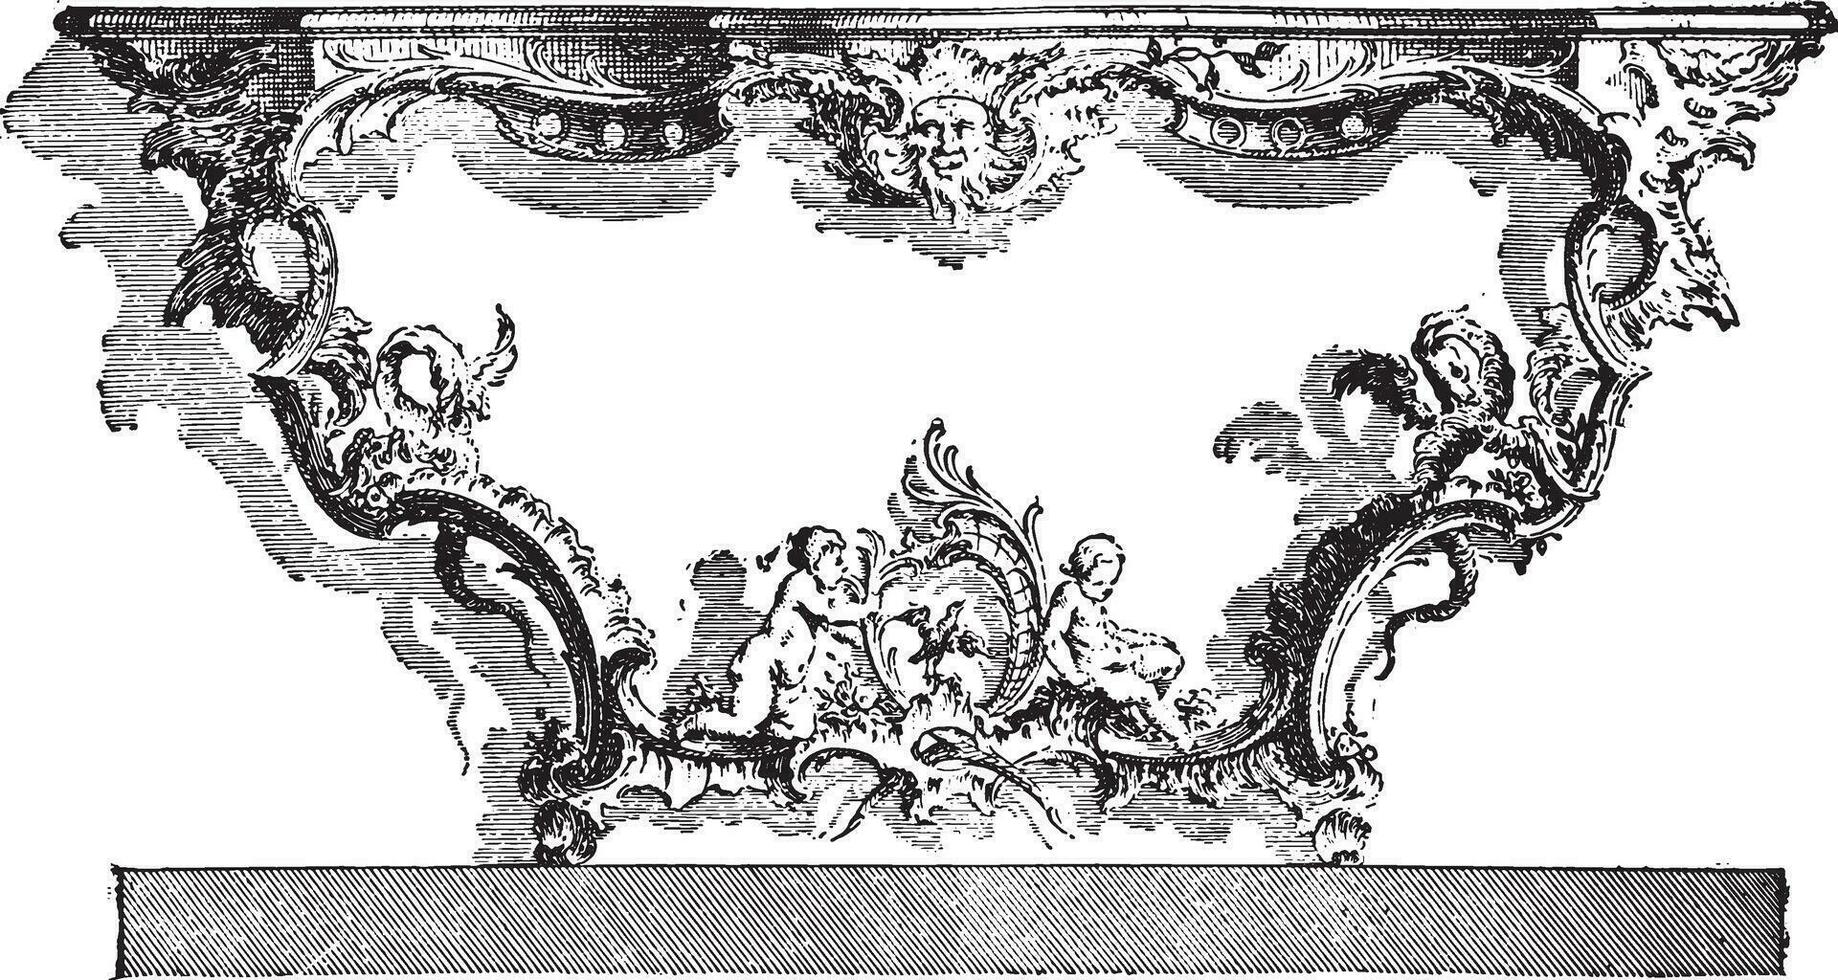 Console apply, after Cuvillies eighteenth century, vintage engraving. vector